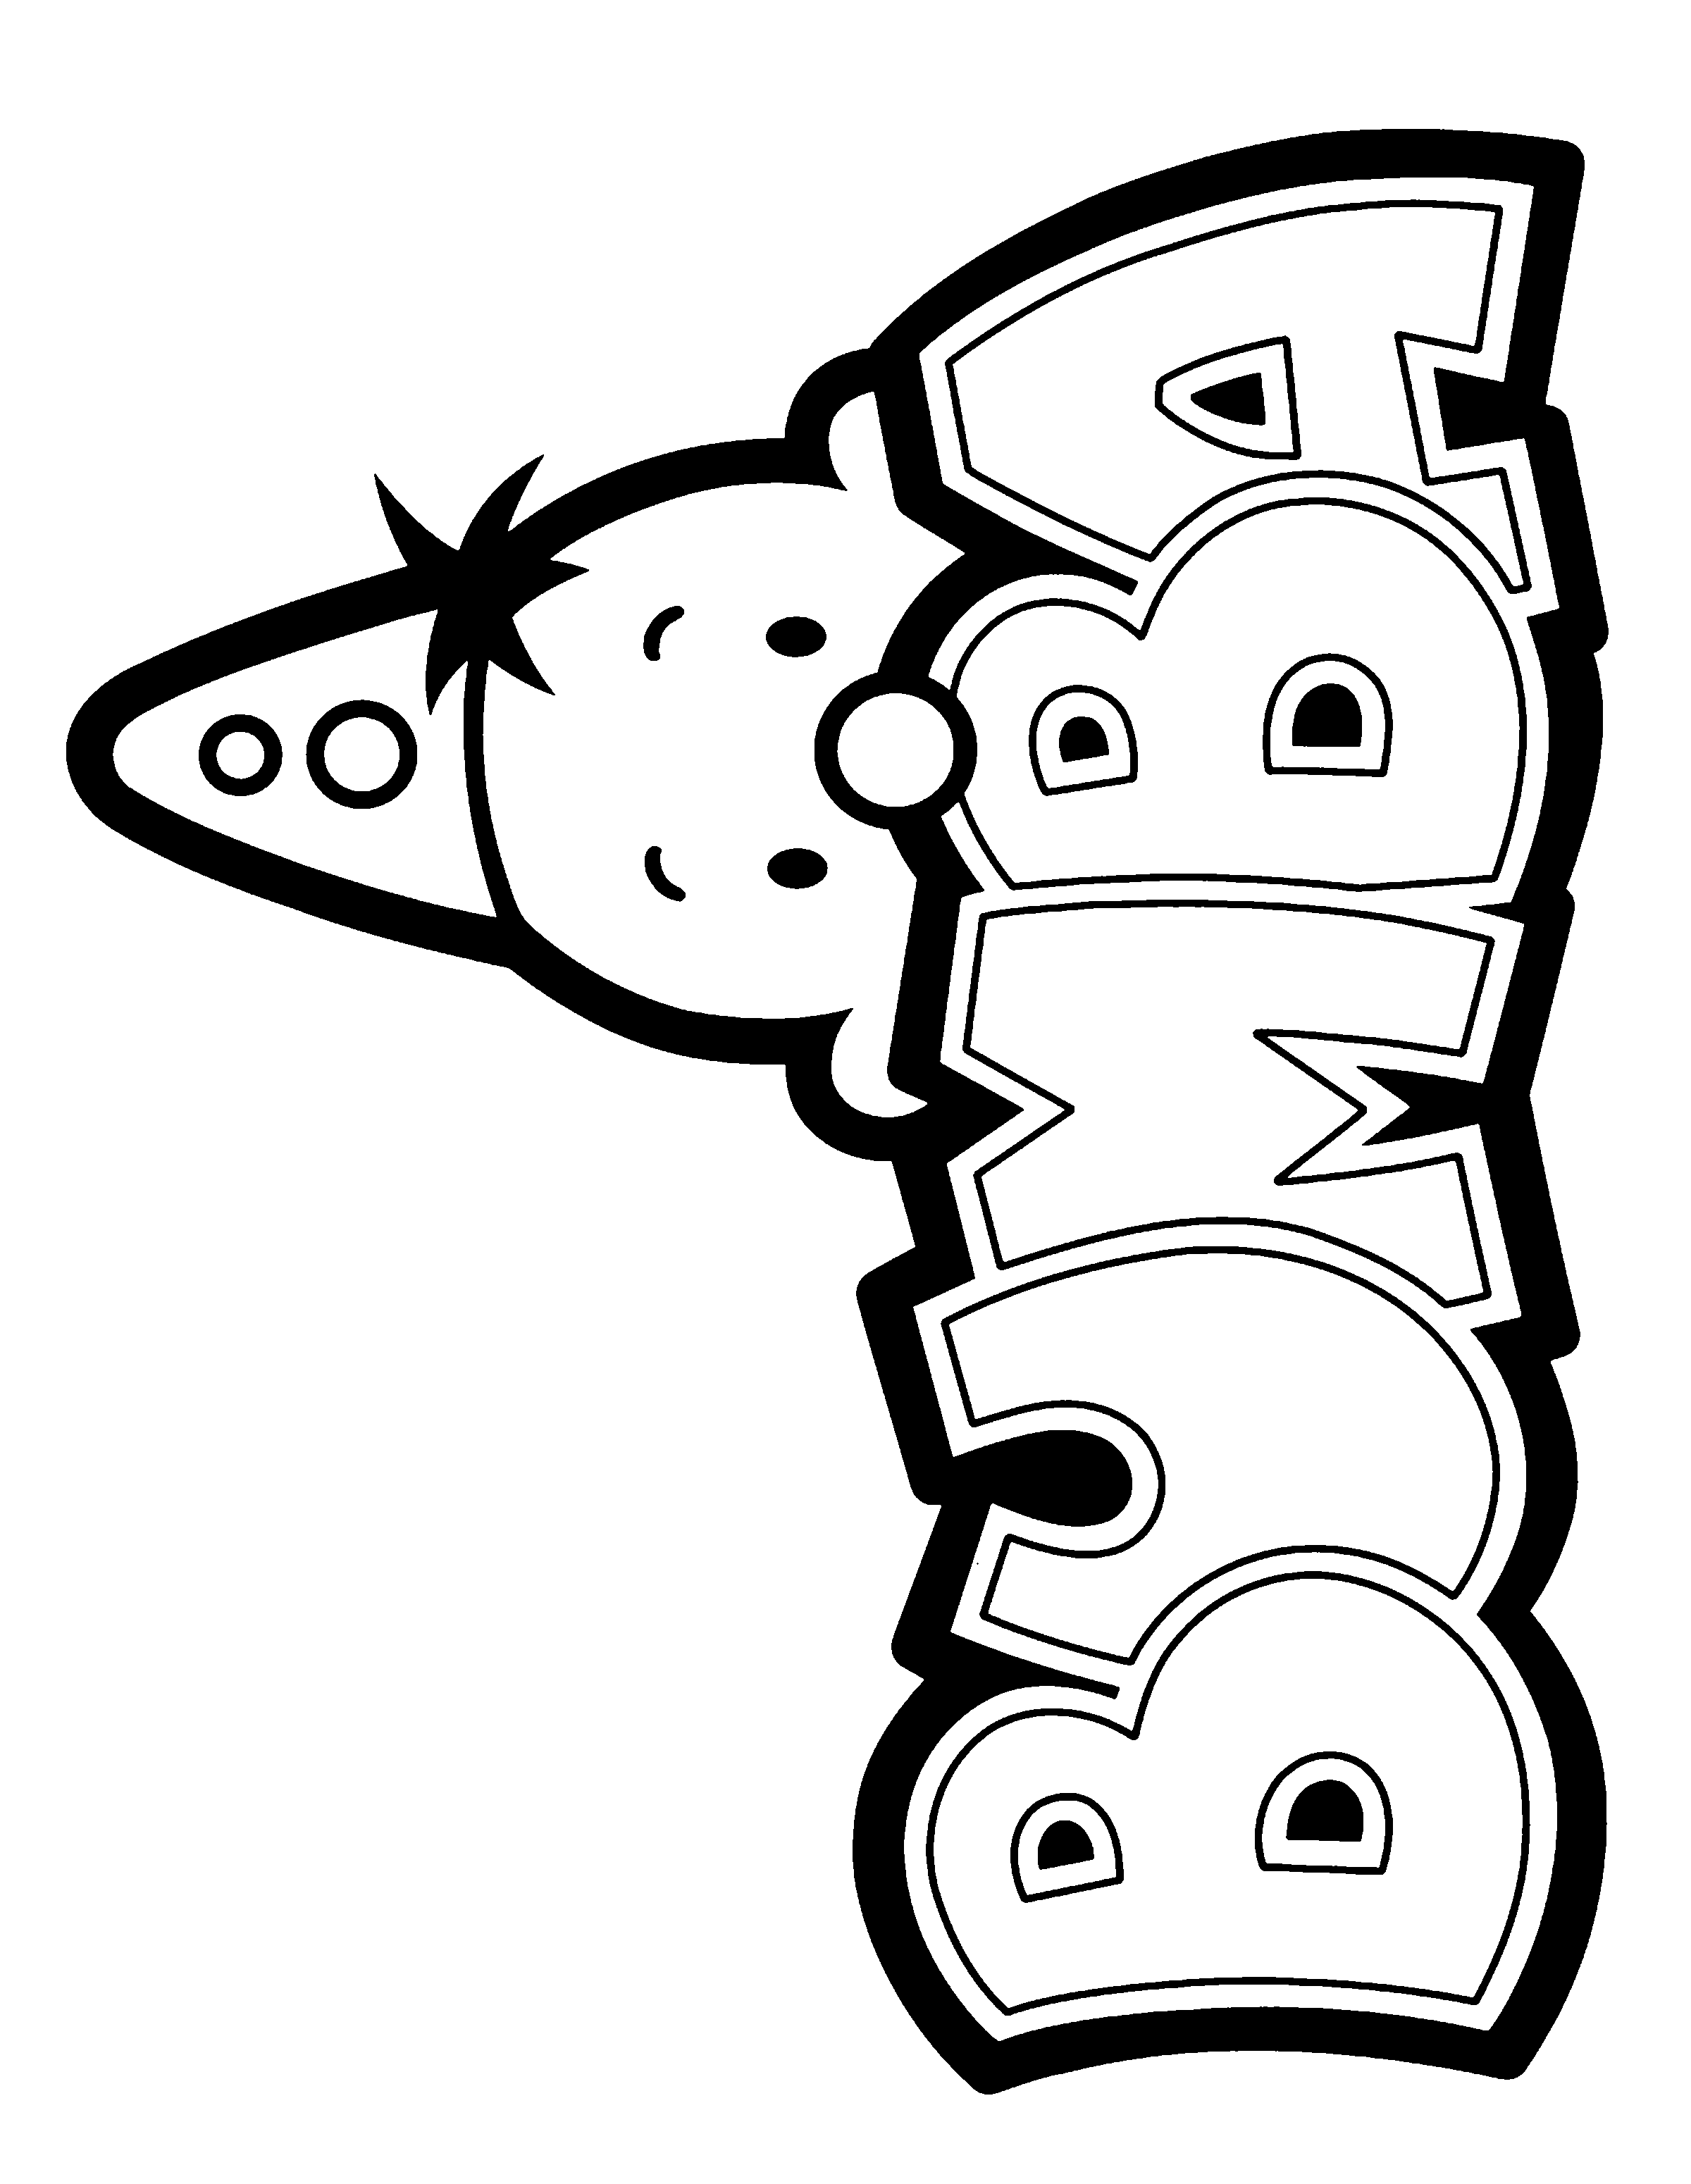 Bumba's logo to color, with the head of the little clown